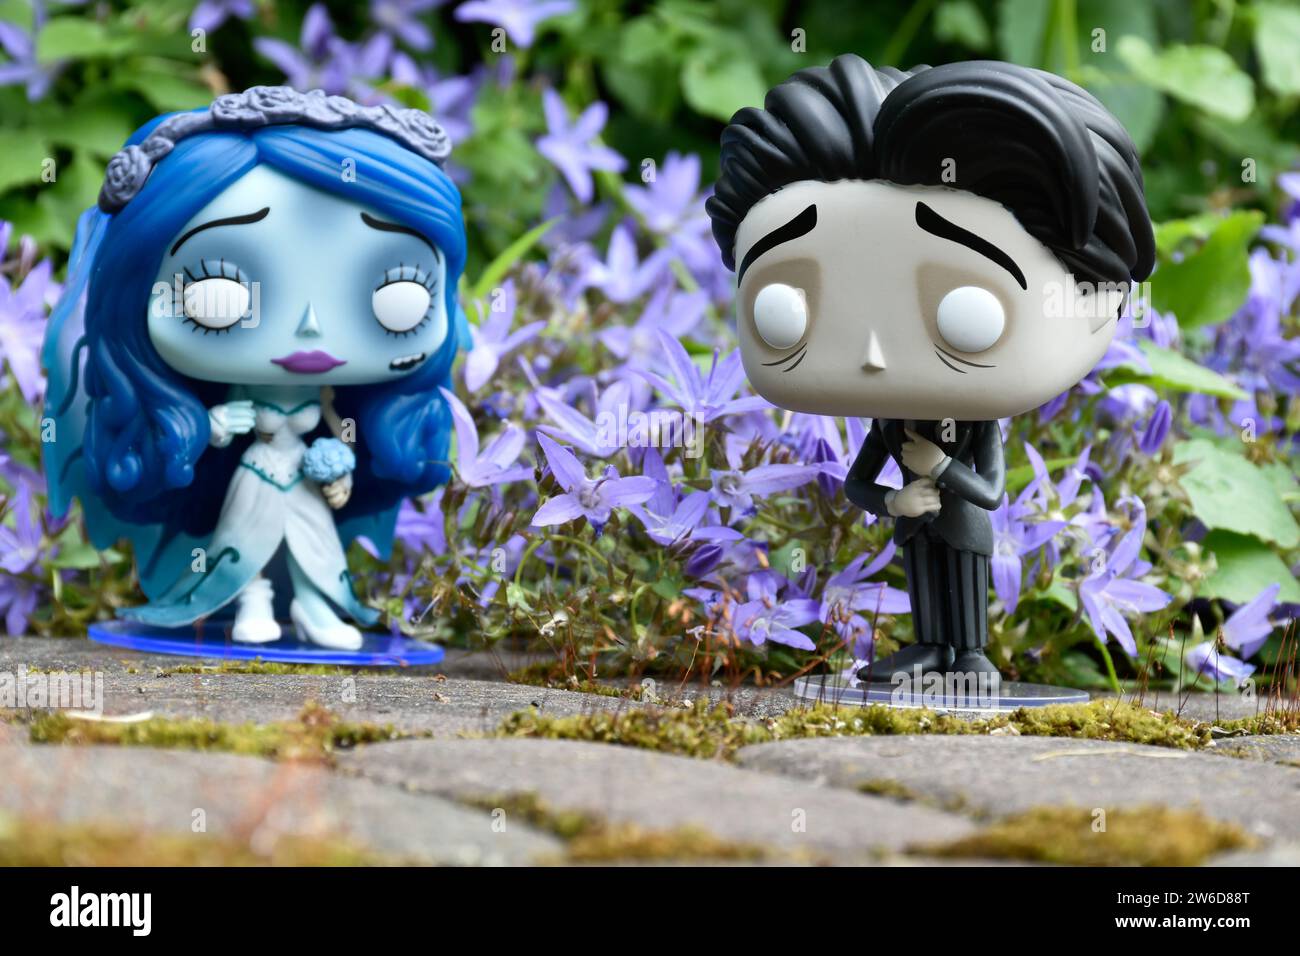 Funko Pop action figures of Emily and Victor from dark fantasy animated film Corpse Bride. Blue flowers, moss, garden, wedding, couple, romance. Stock Photo